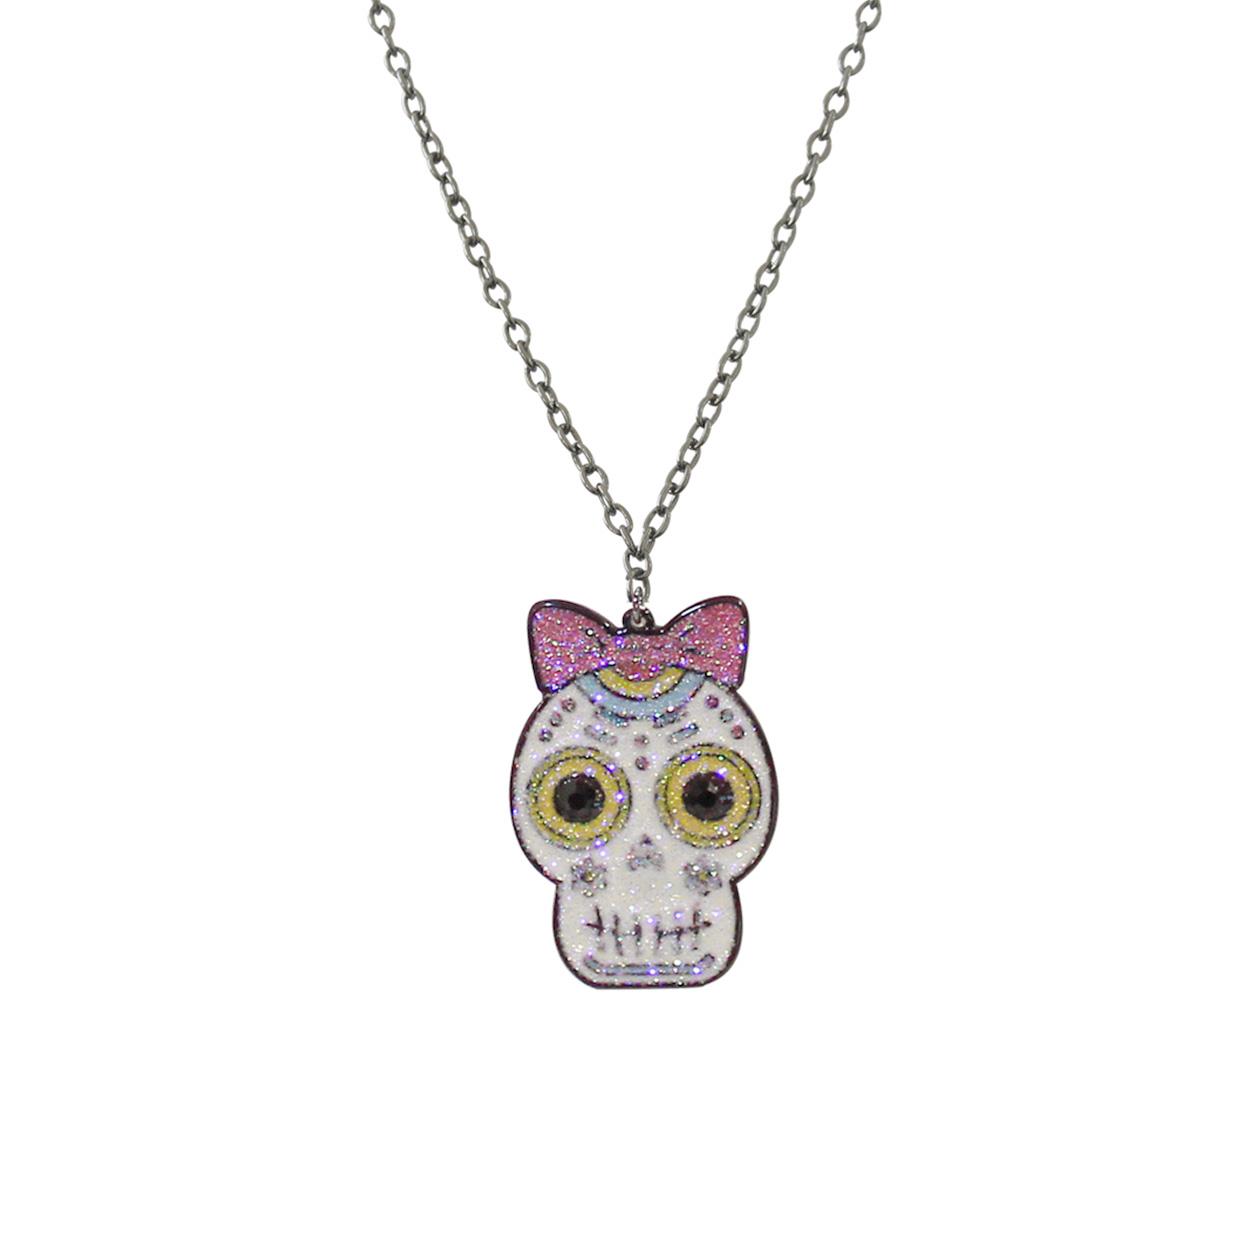 HALLOWEEN DAY OF THE DAY SKULL NECKLACCE